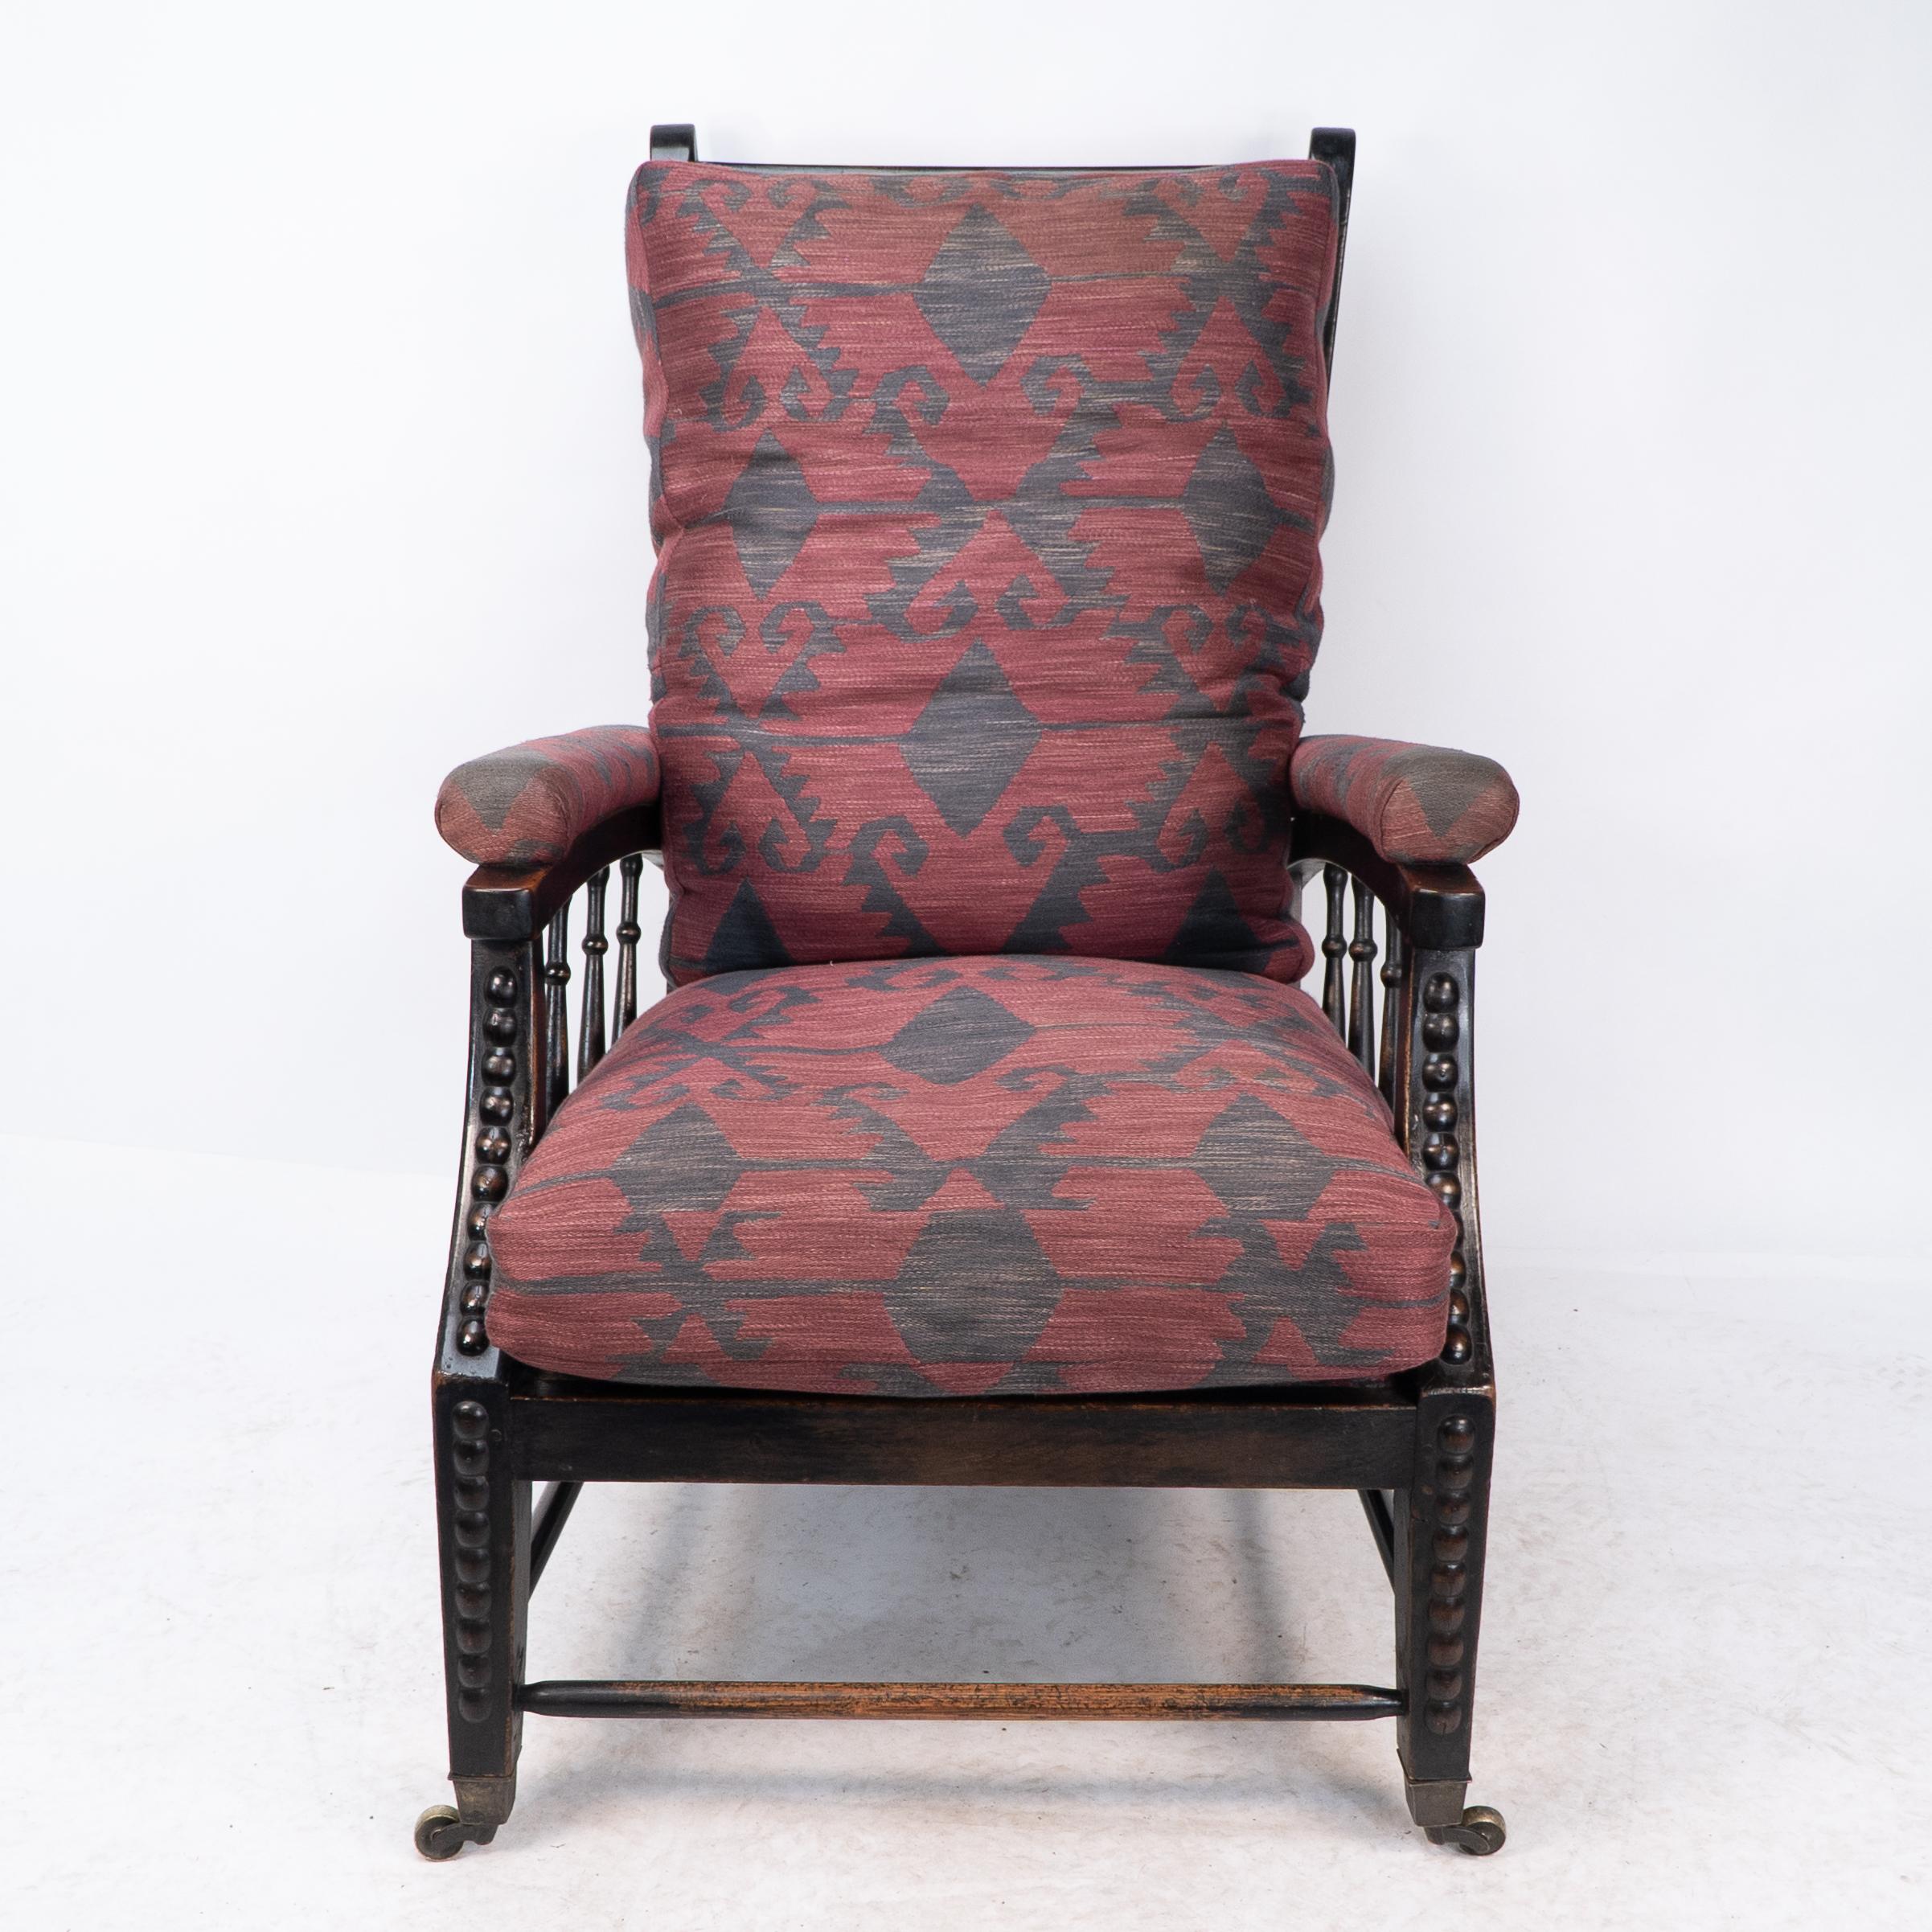 Phillip Webb for Morris and Co. Designed in C1866.
A rare Aesthetic Movement ebonized adjustable reclining armchair. The arched arms with padded armrests united to the sweeping arched legs by turned uprights, with adjustable reclining shaped back.